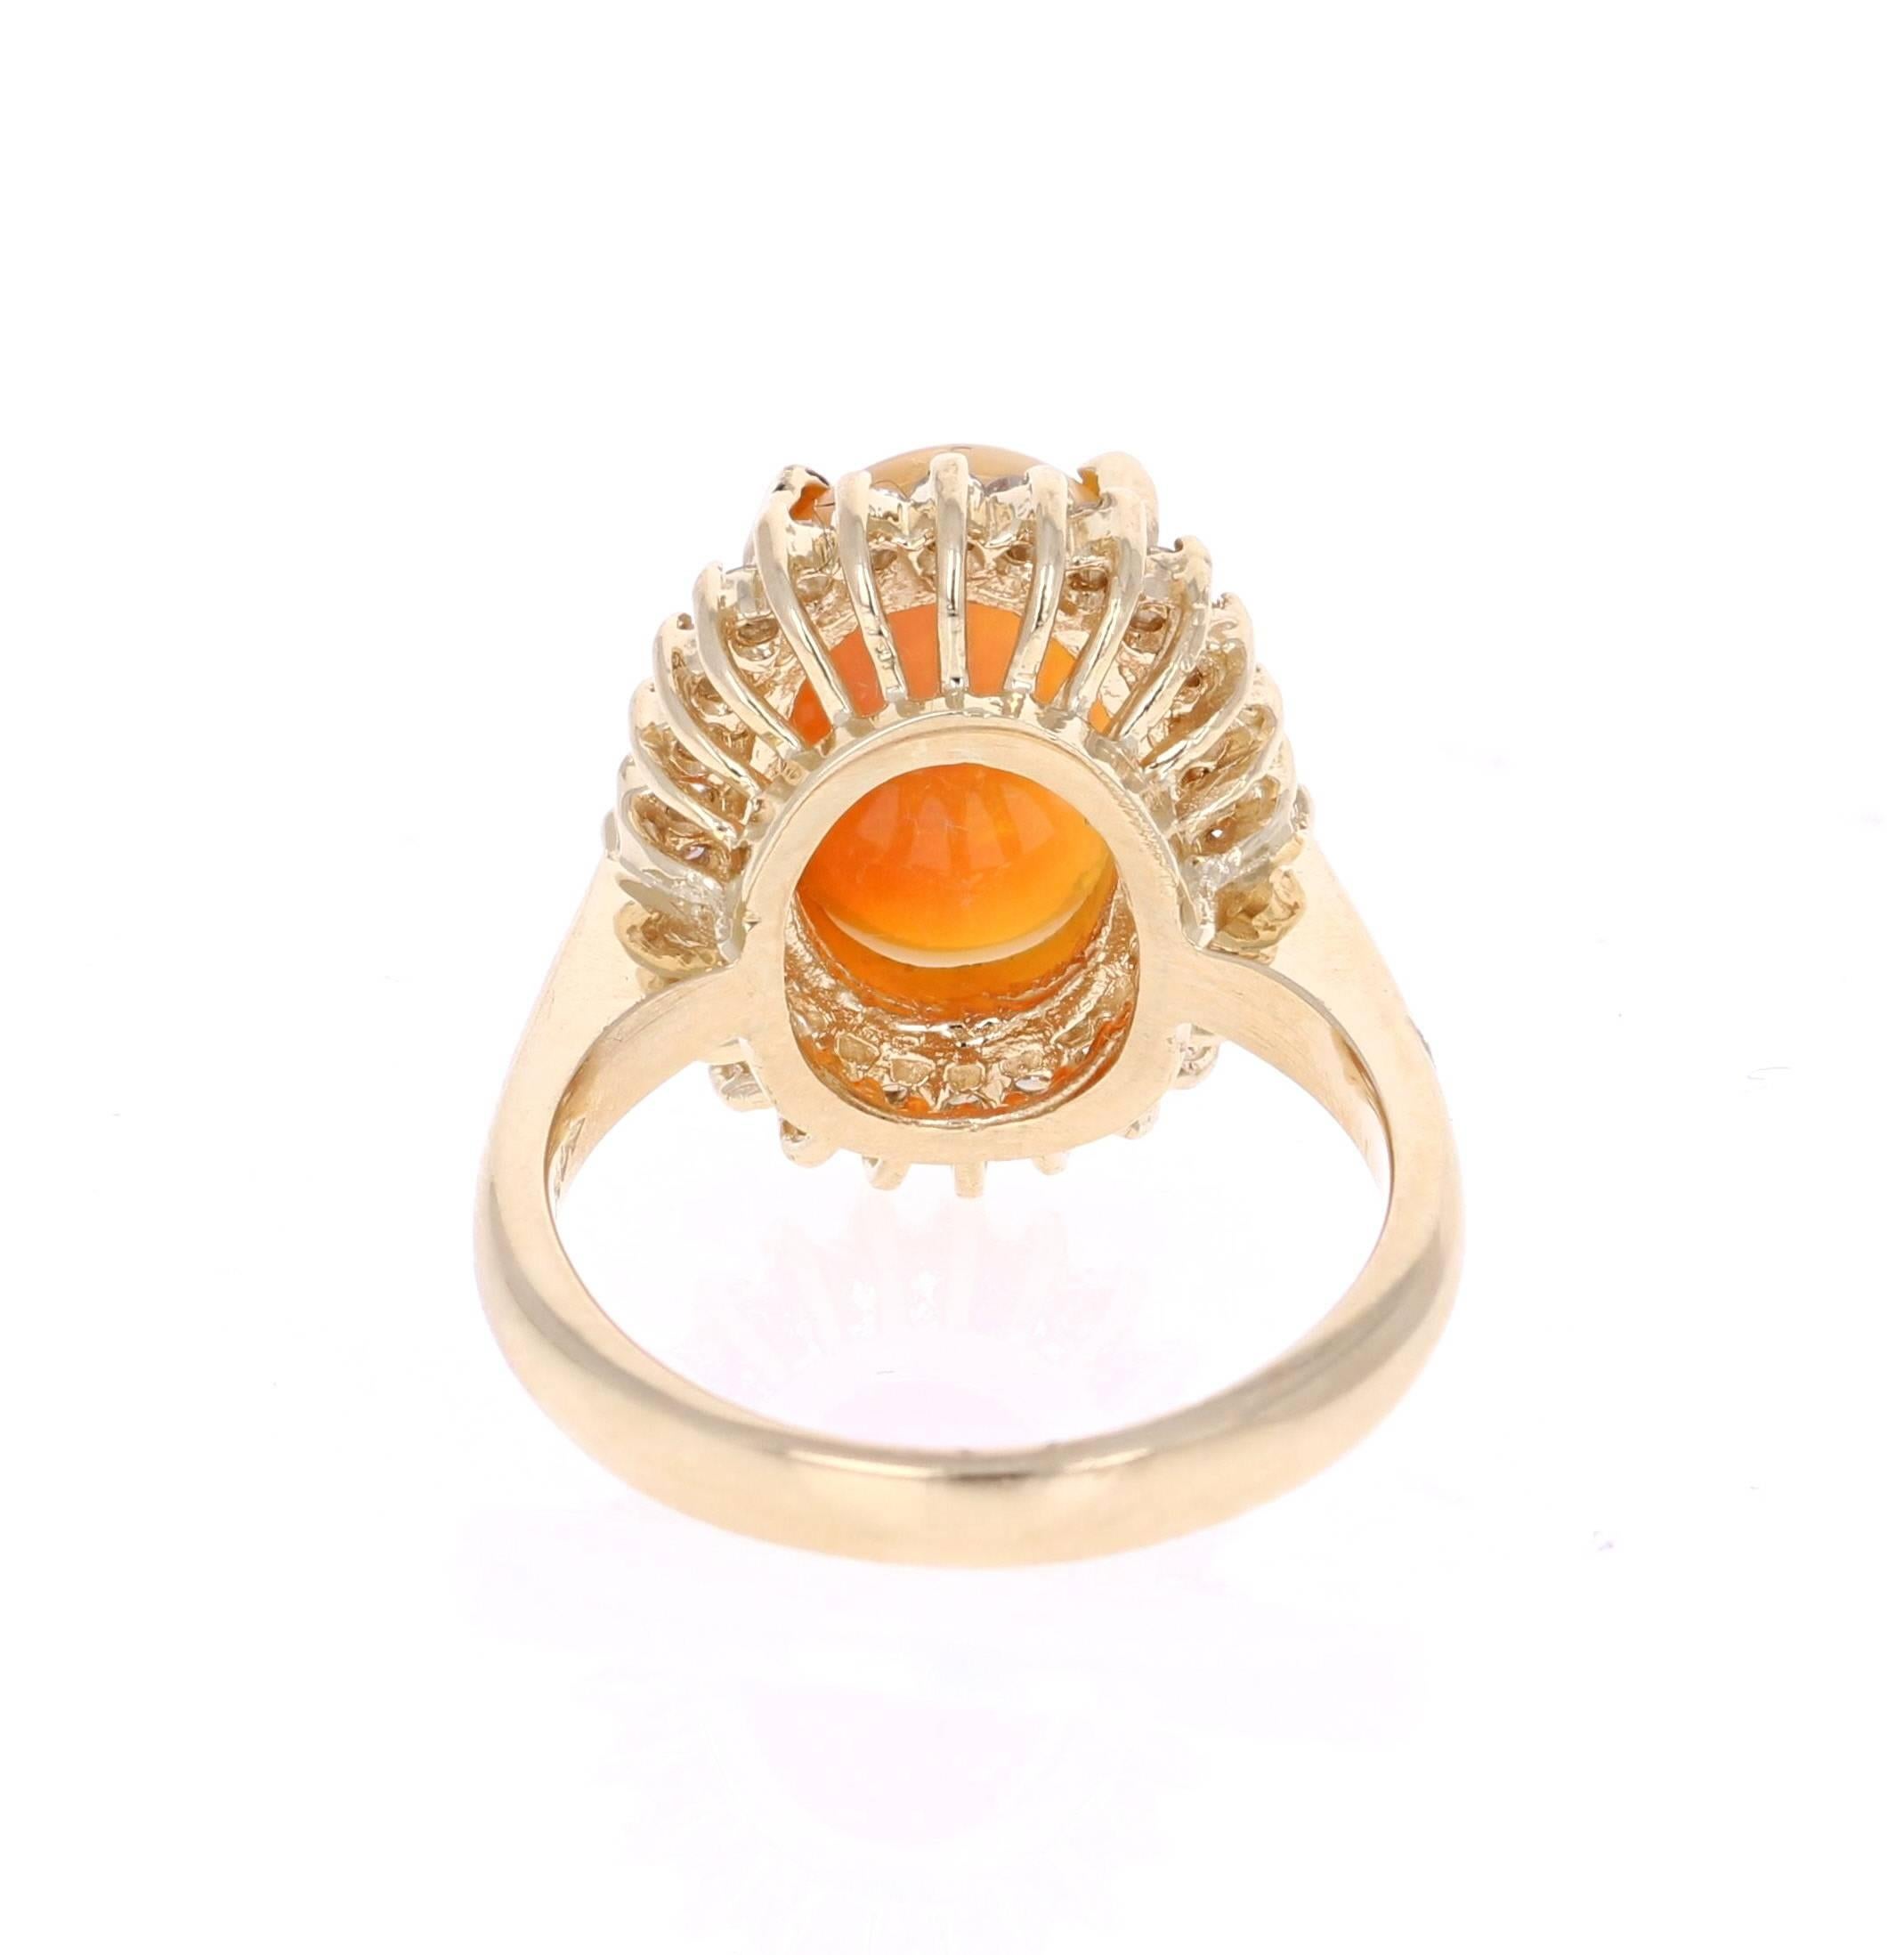 Contemporary 4.02 Carat Opal Diamond 14K Yellow Gold Cocktail Ring